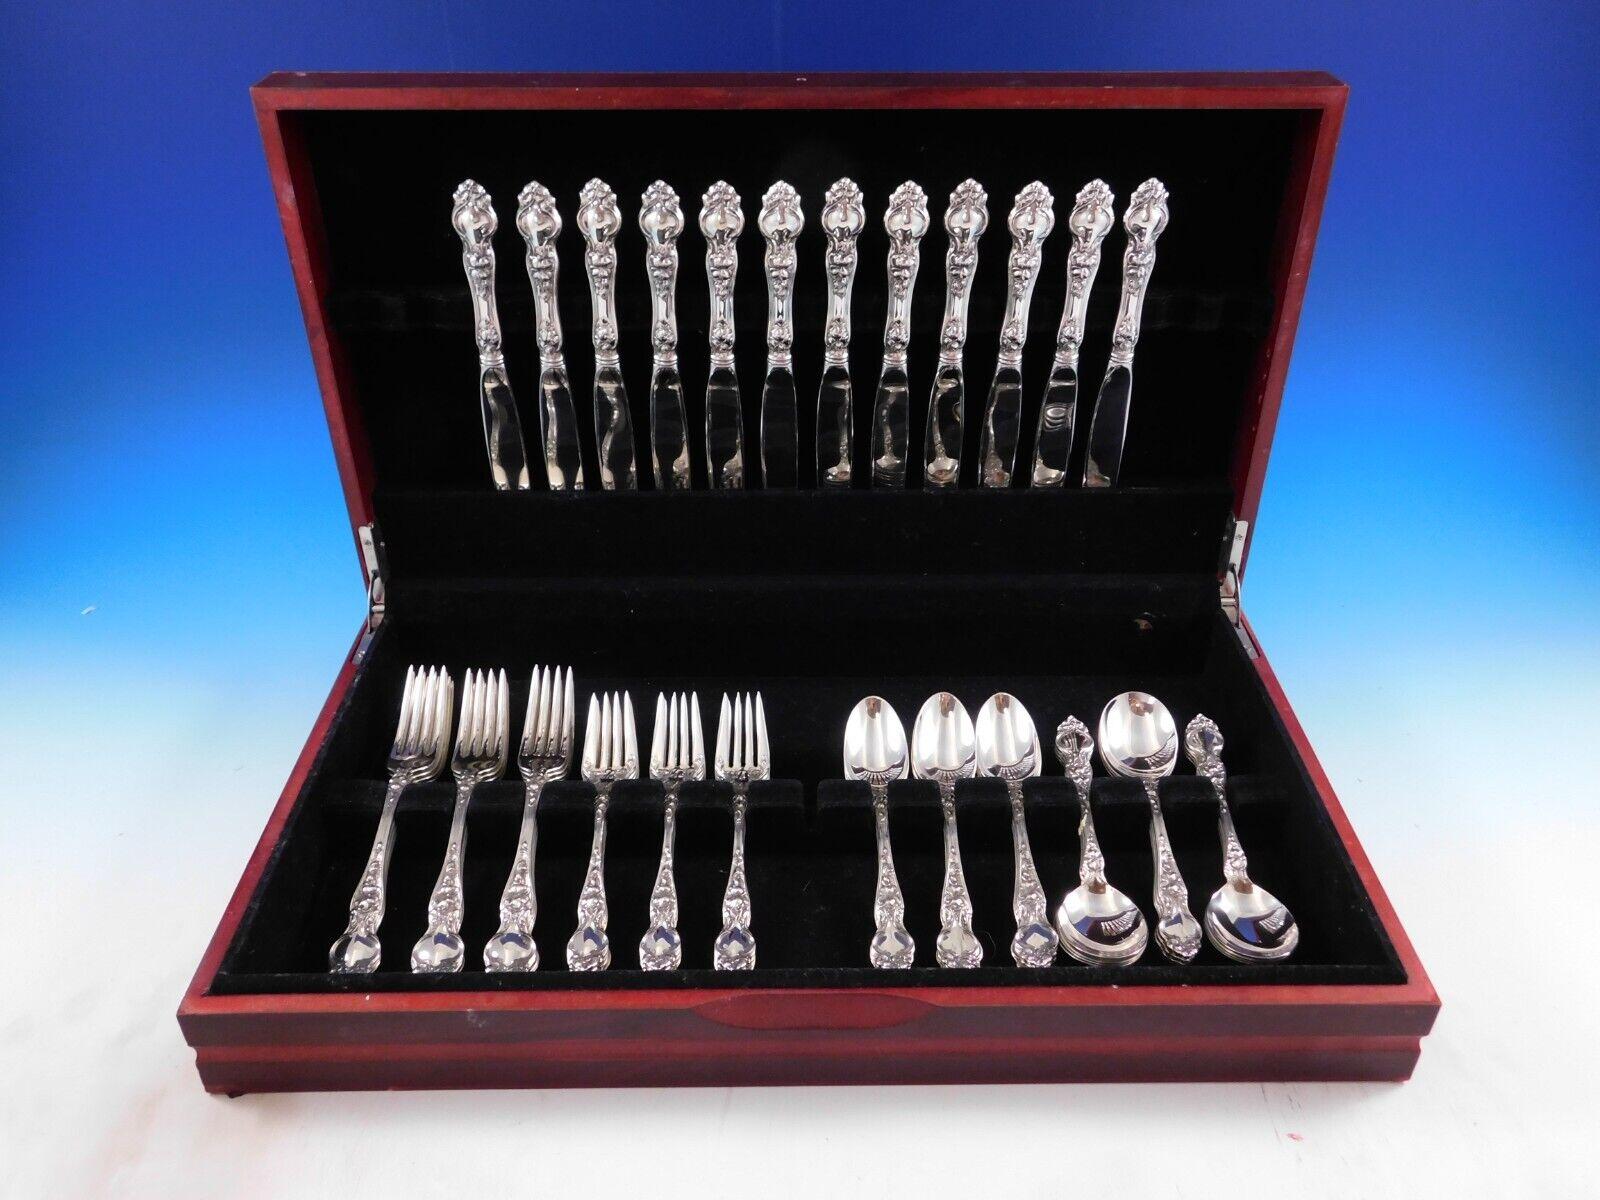 Violet by Wallace sterling silver Flatware set - 60 pieces. This set includes:

12 Knives, 8 3/4